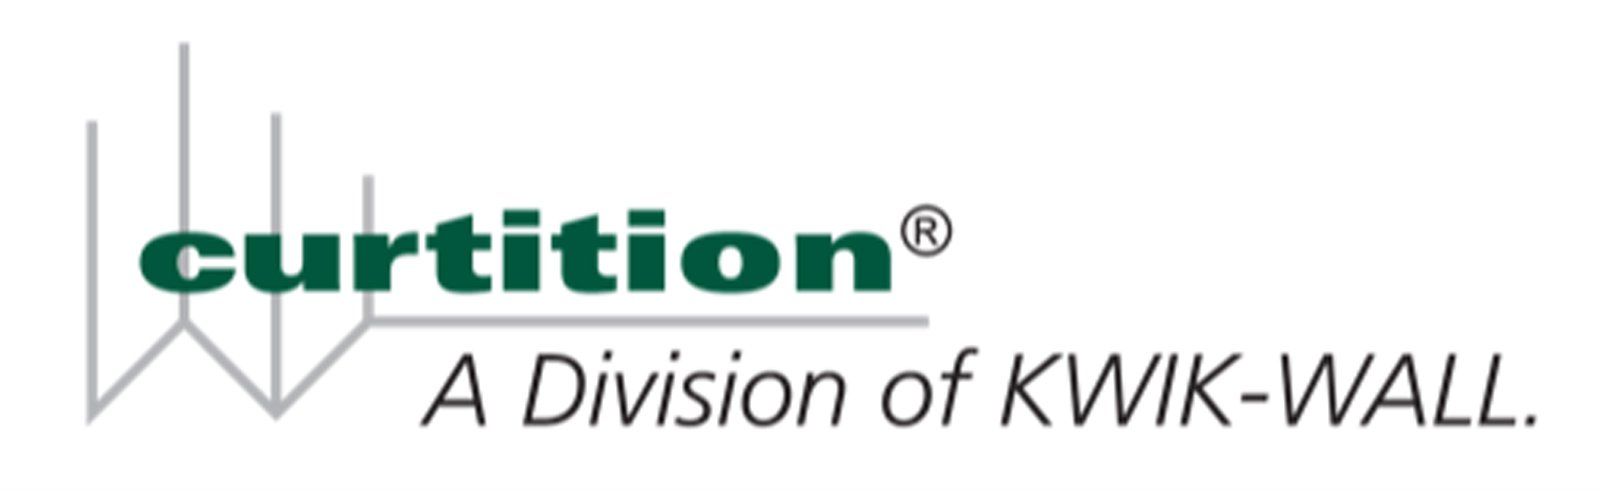 Curtition KWIK-WALL — Rockland, MA — Allied Products Group